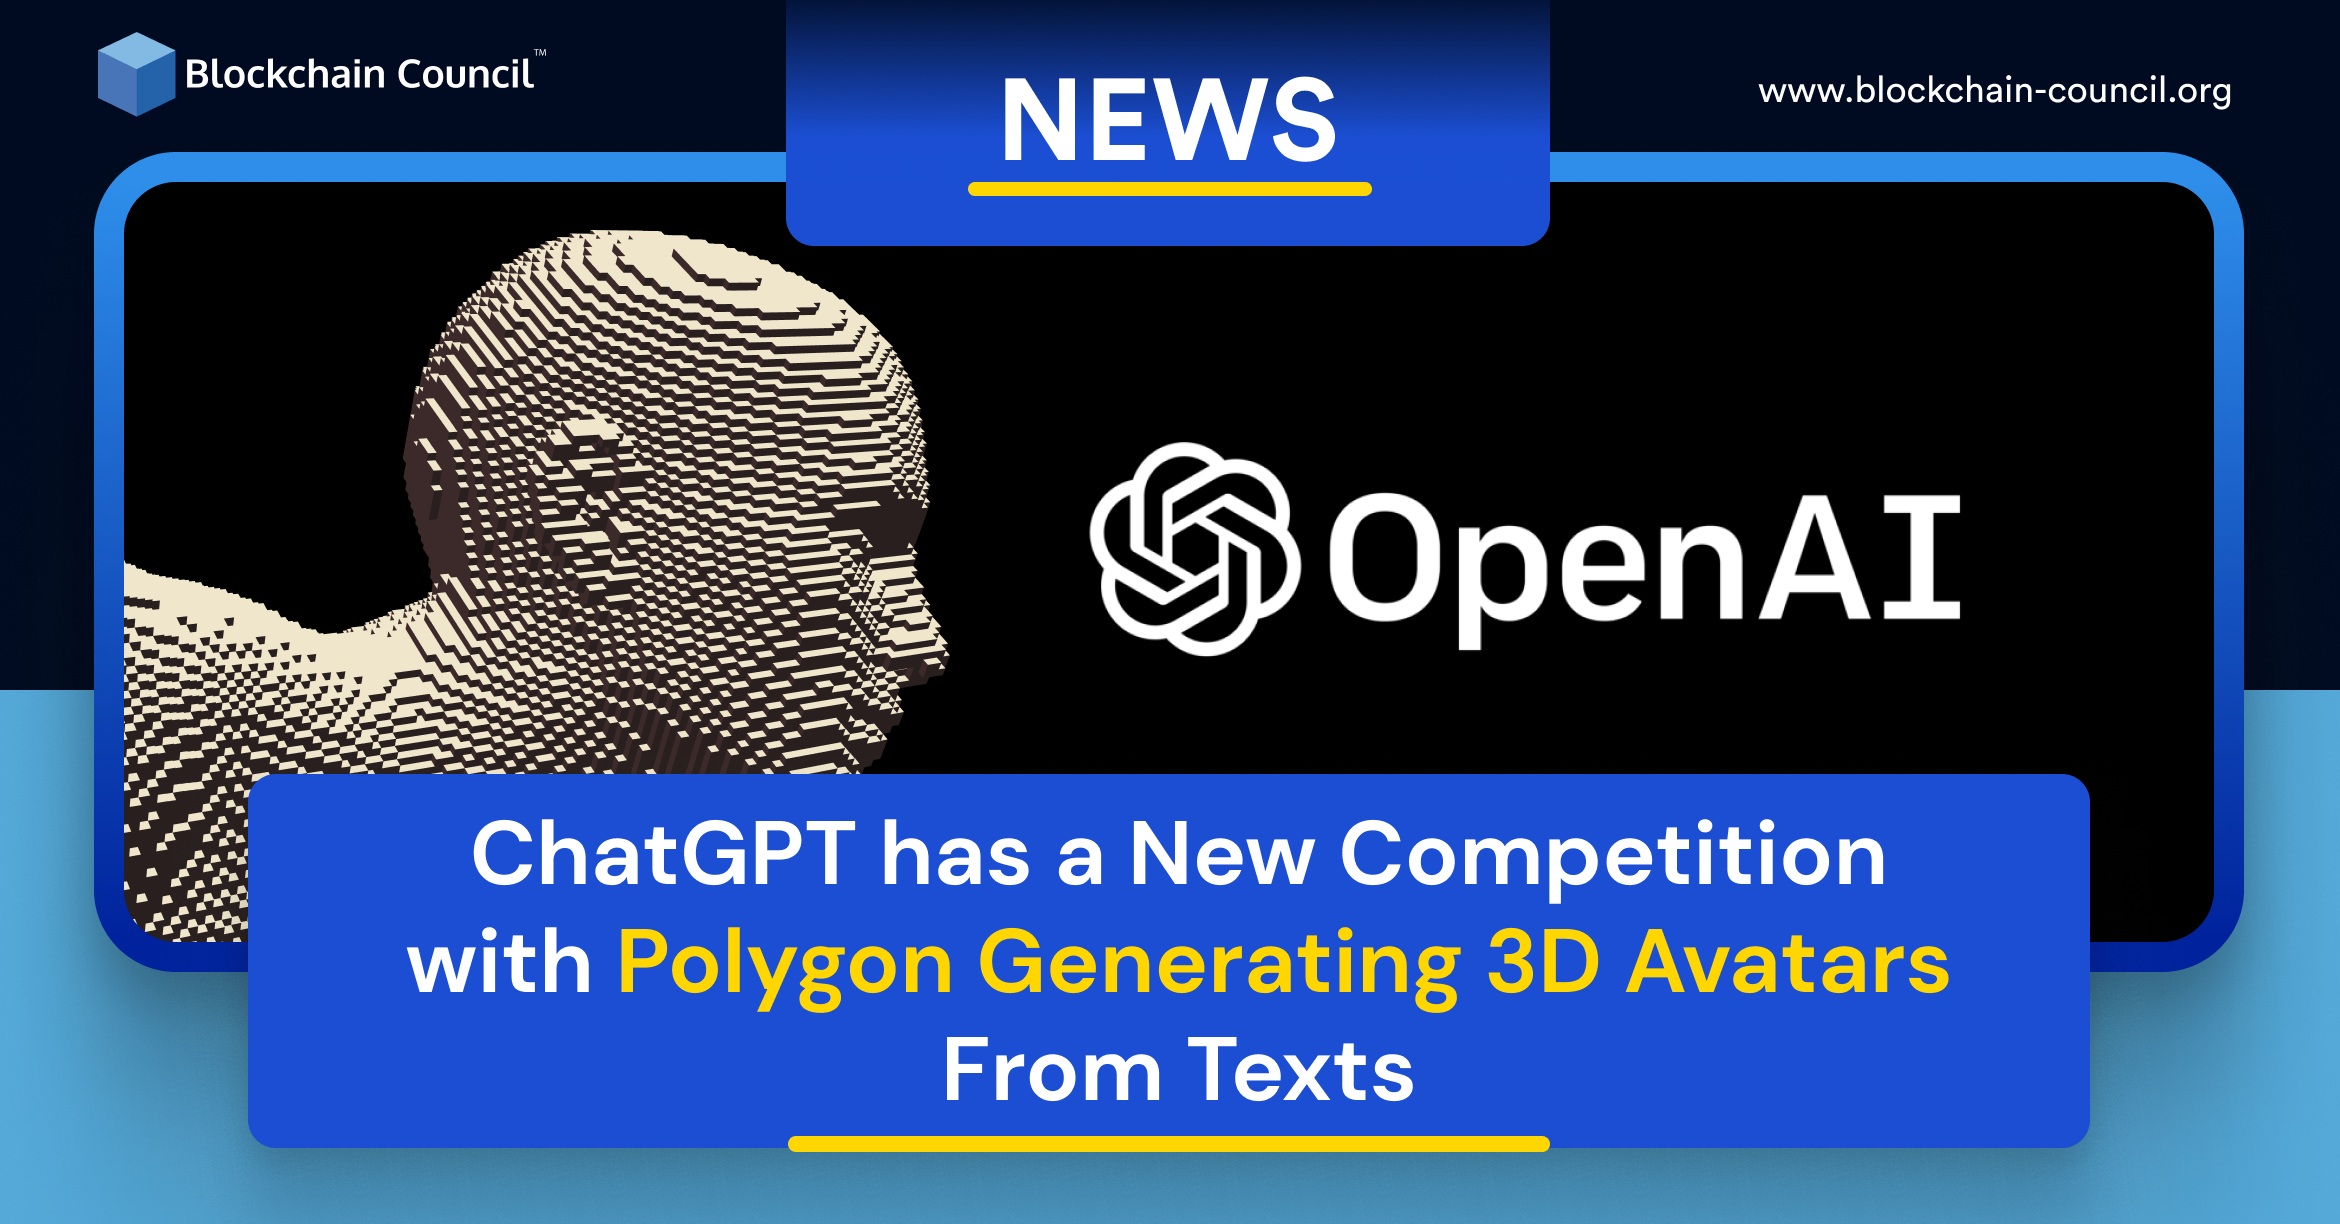 ChatGPT has a New Competition with Polygon Generating 3D Avatars From Texts